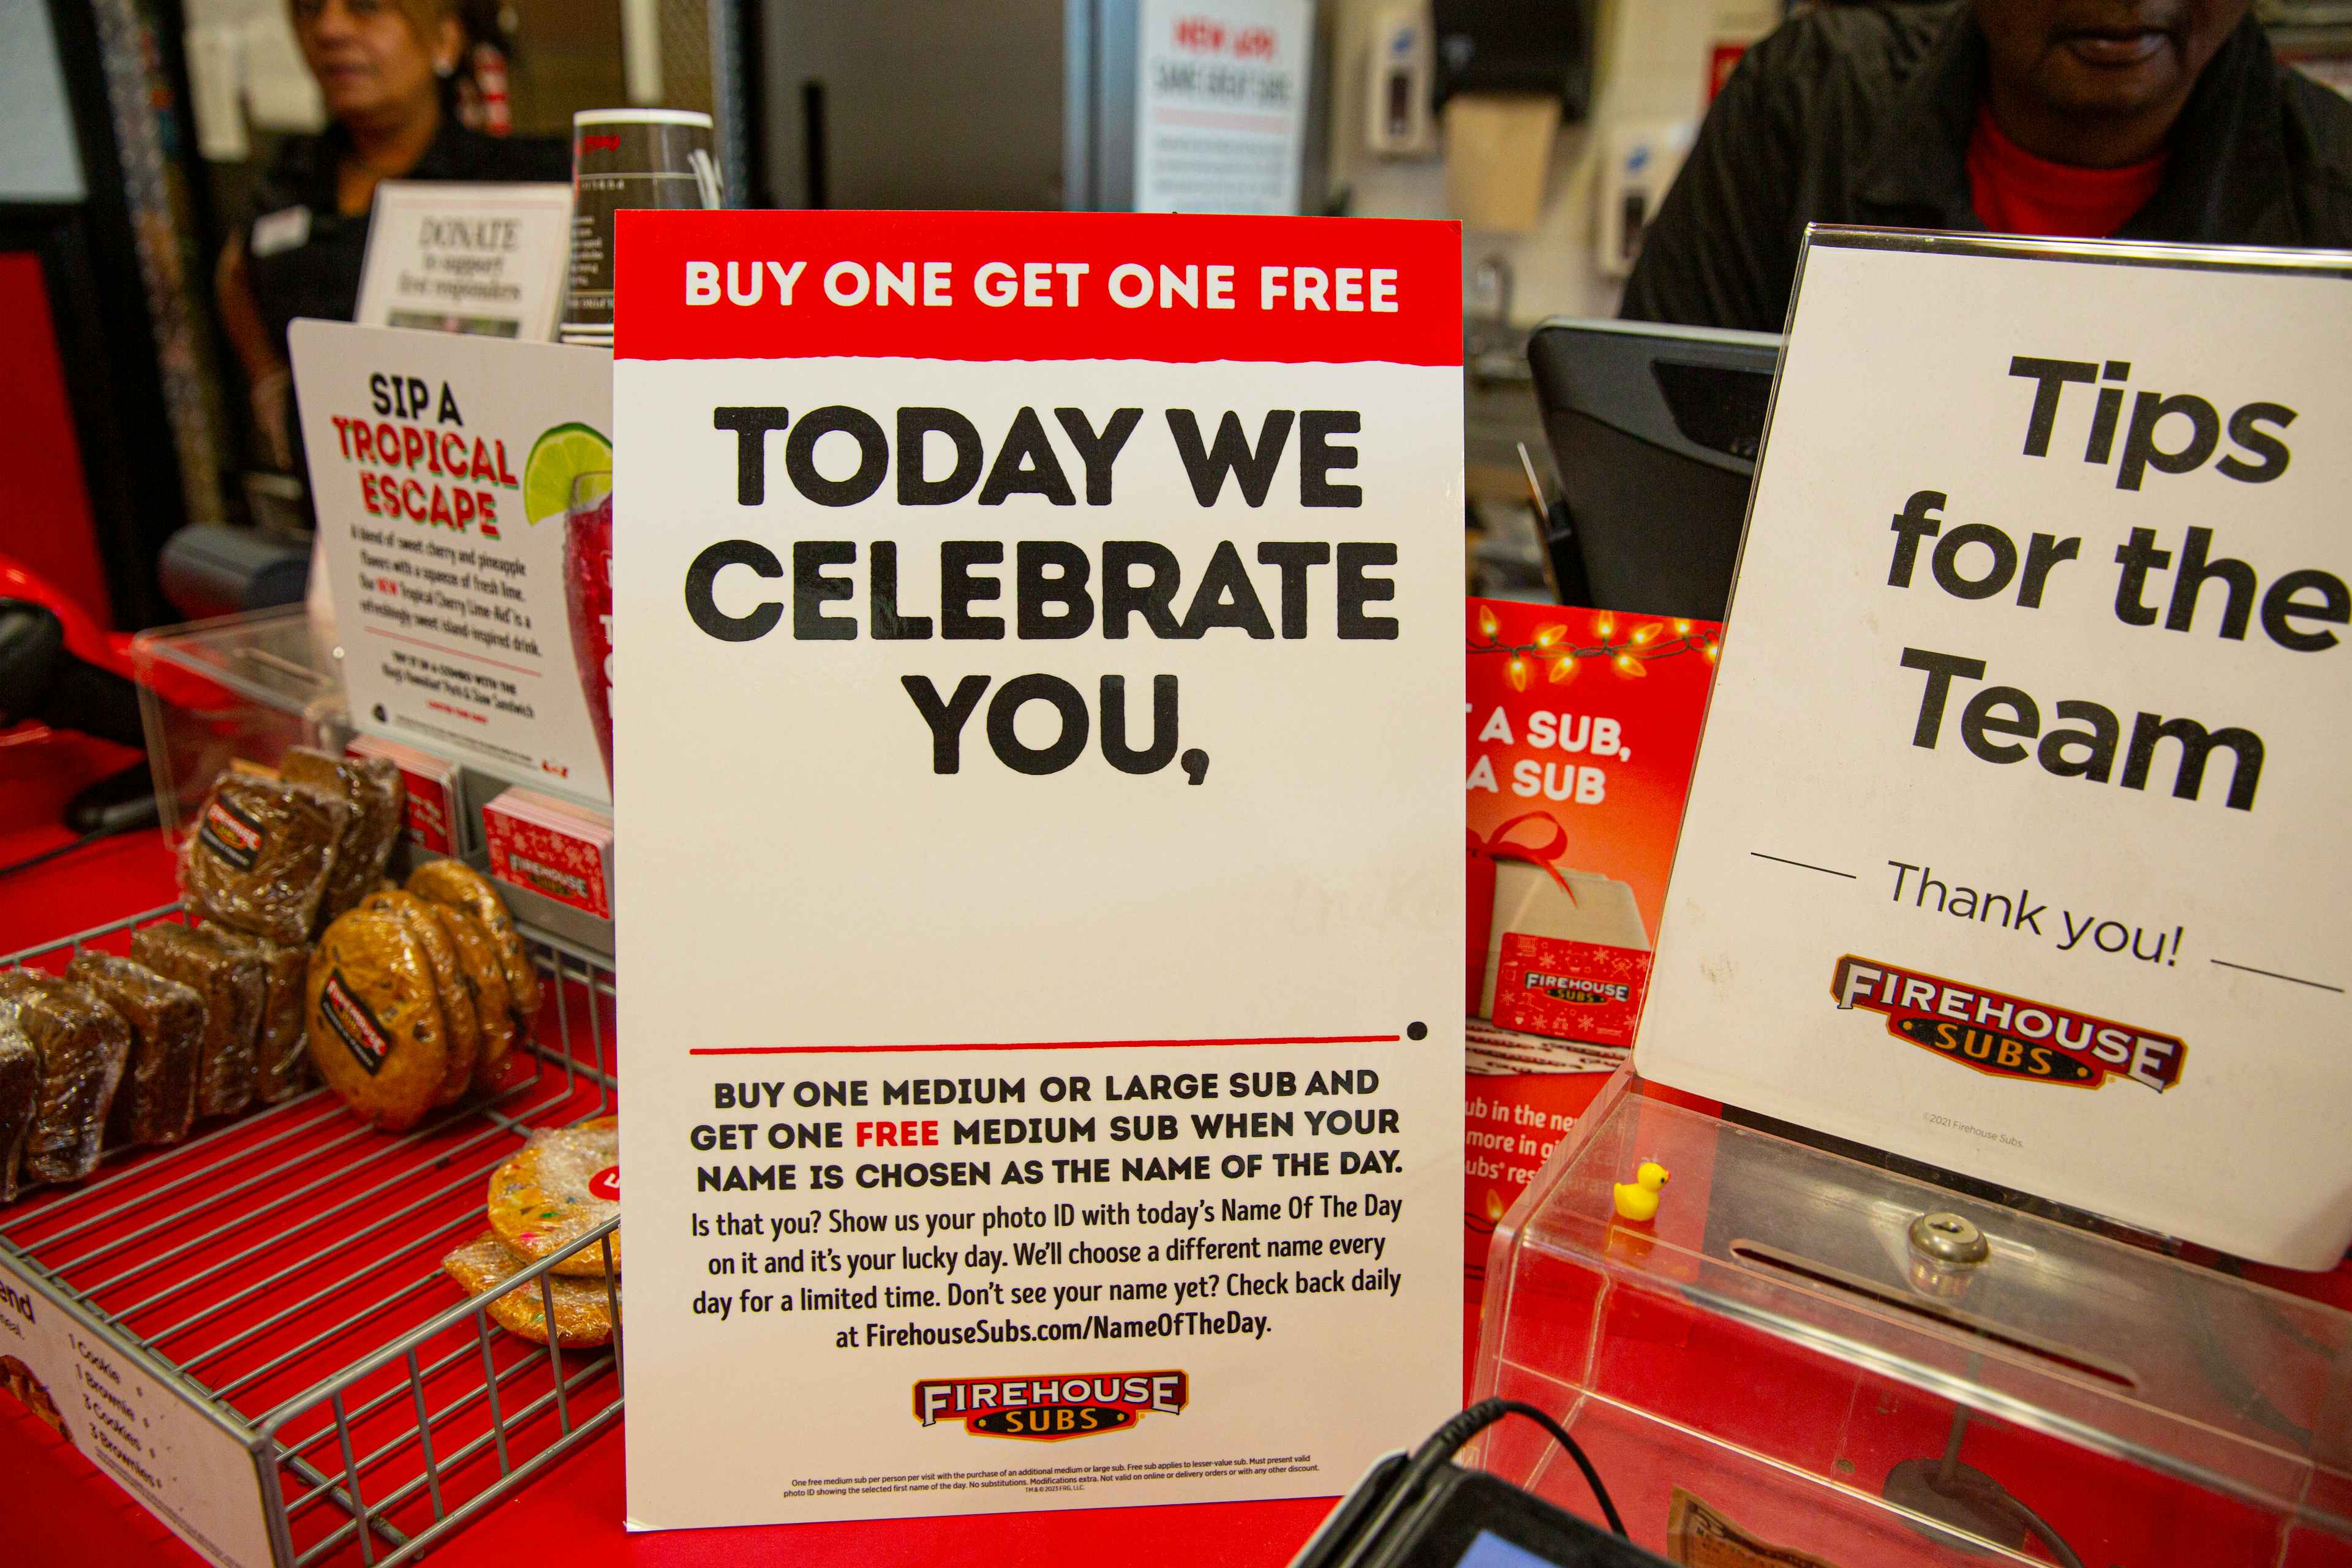 Signage showing offer from Firehouse Subs